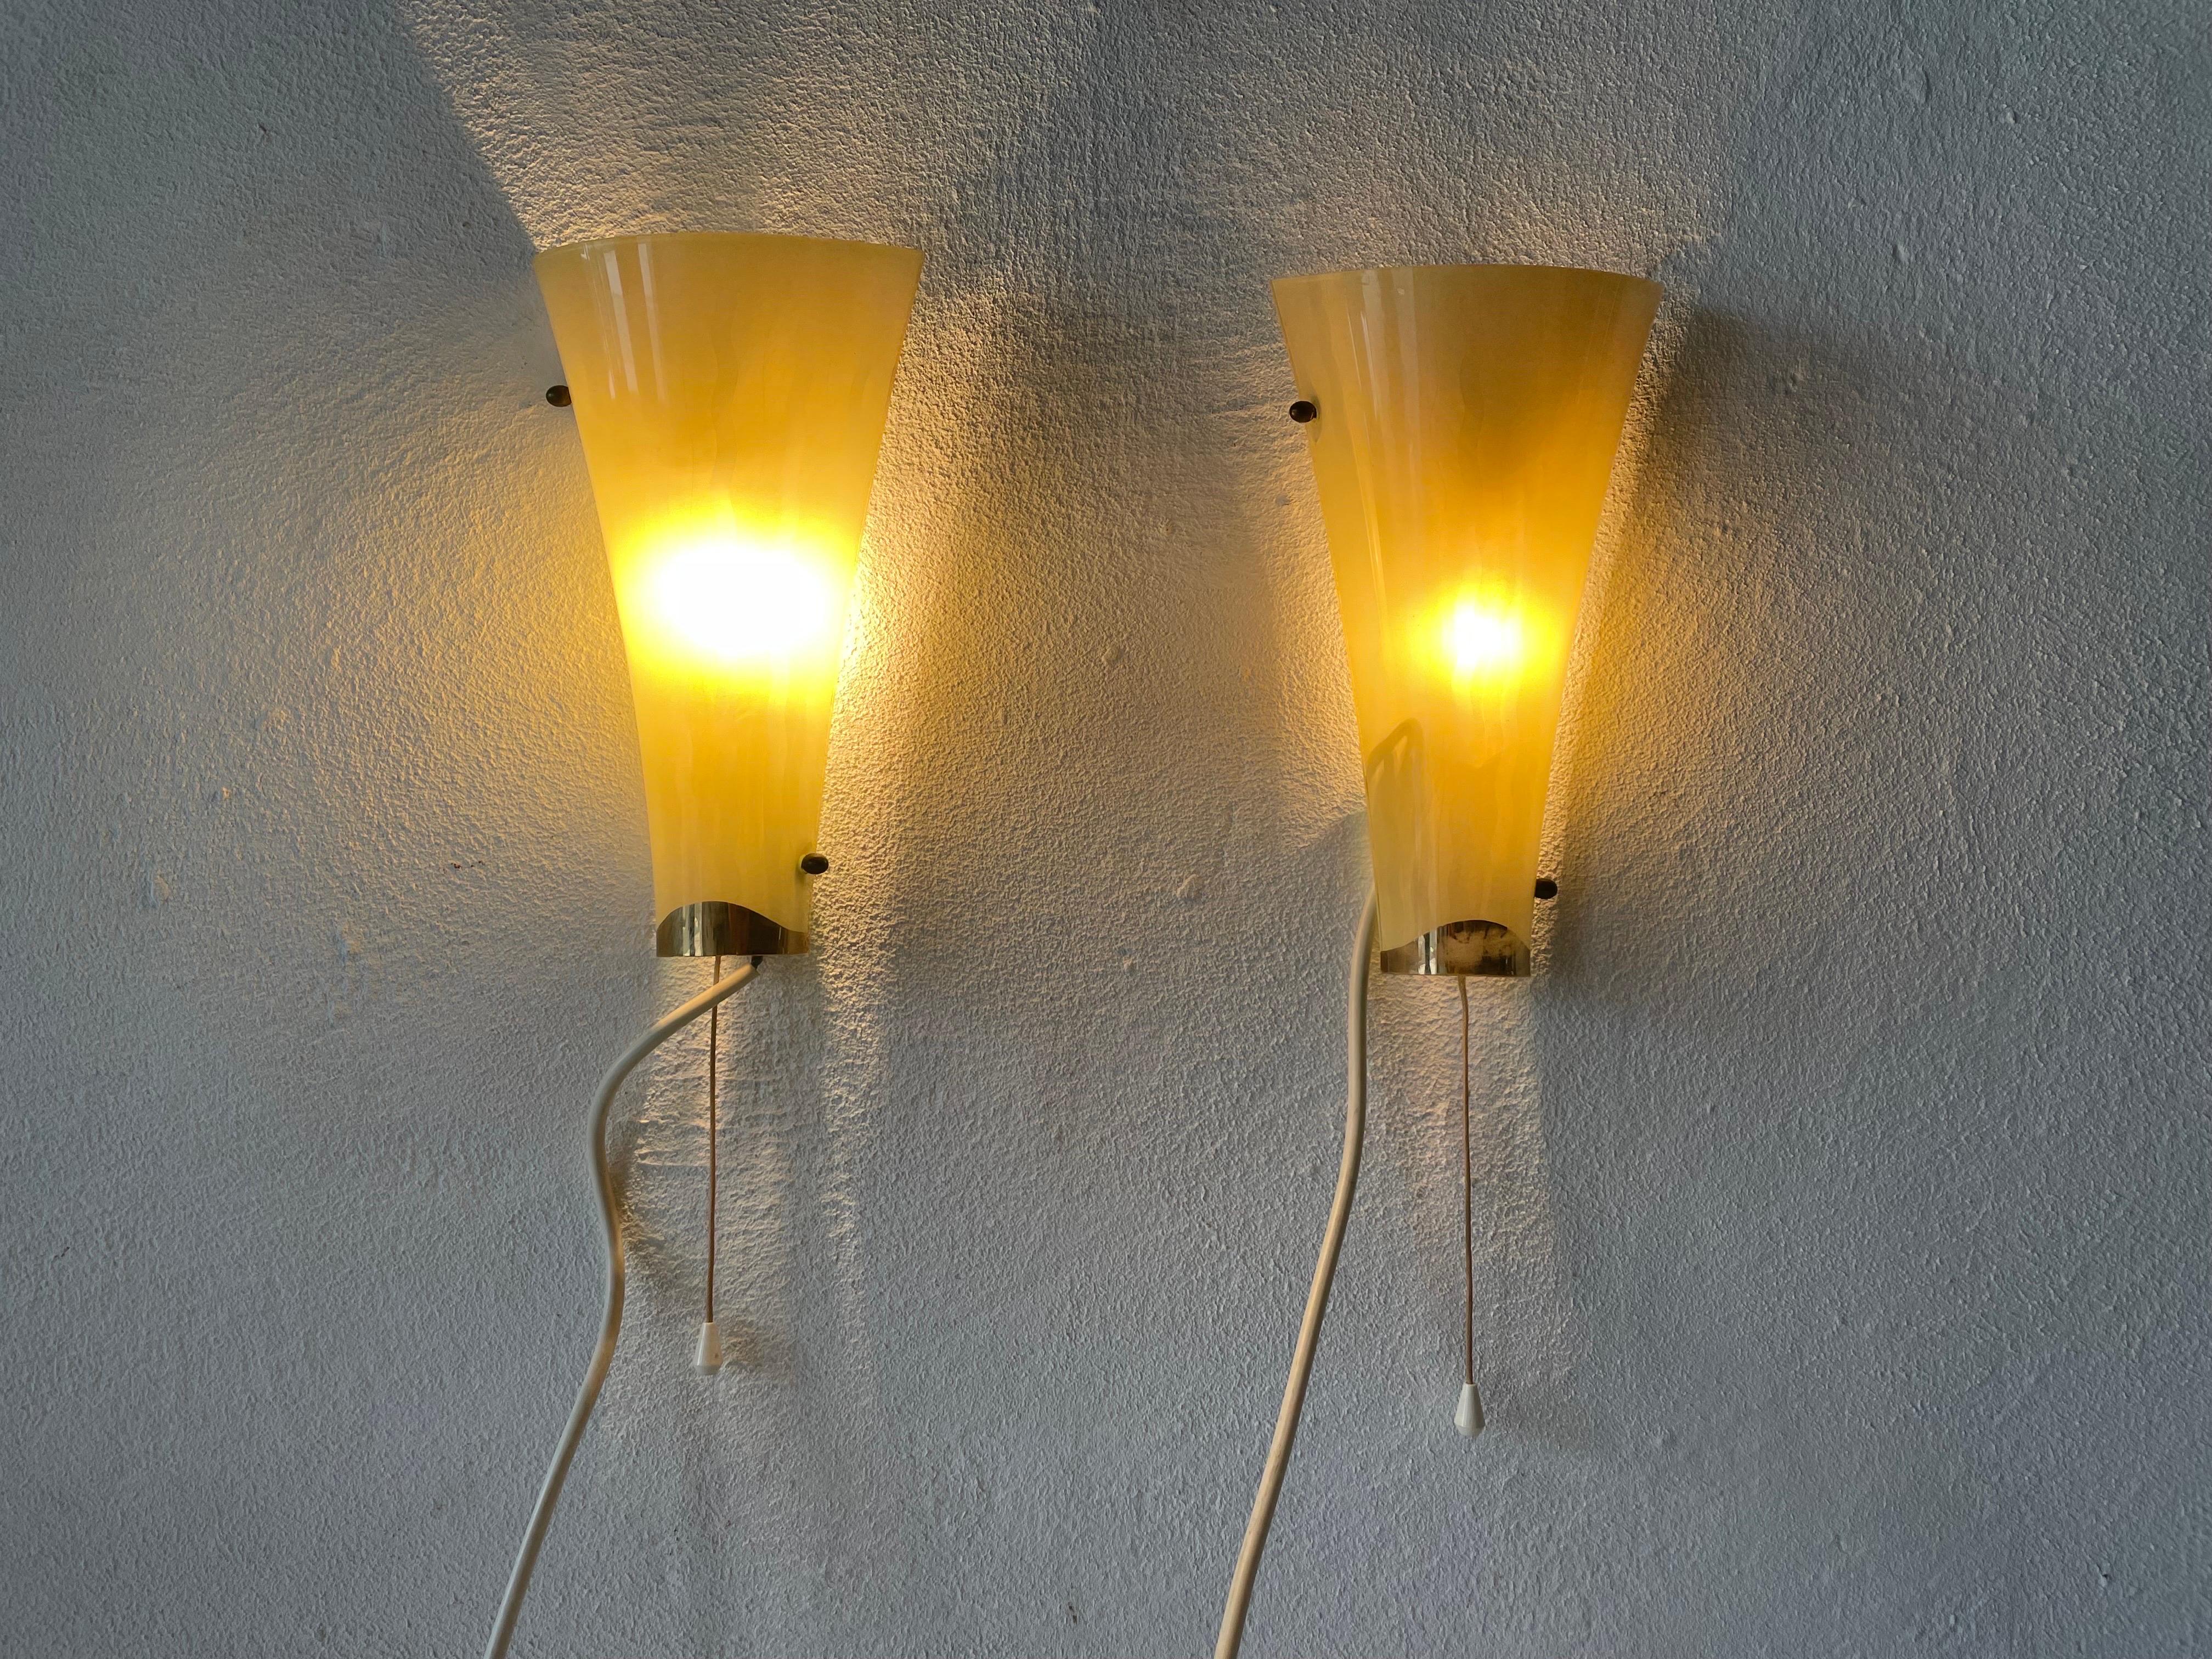 Mid-century Green Curved Glass Pair of Sconces, 1950s, Germany For Sale 4